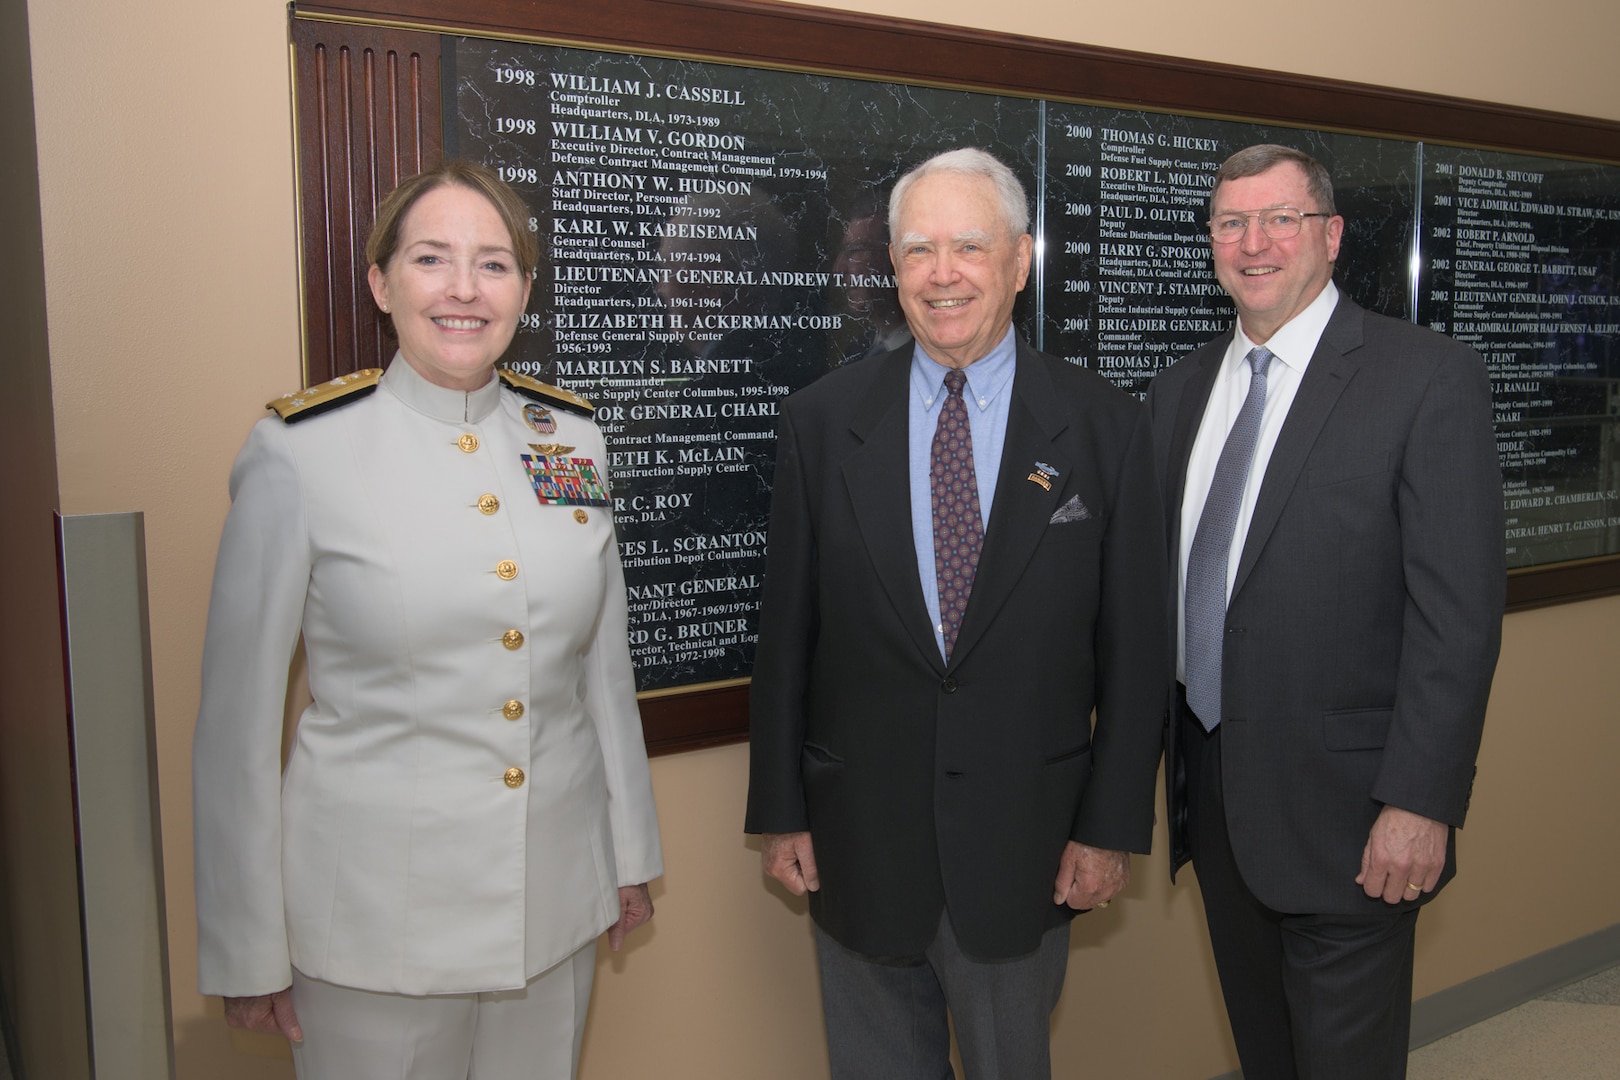 Three people pose in front of the Hall of Fame wall at the Defense Logistics Agency headquarters in Fort Belvoir, Virginia.